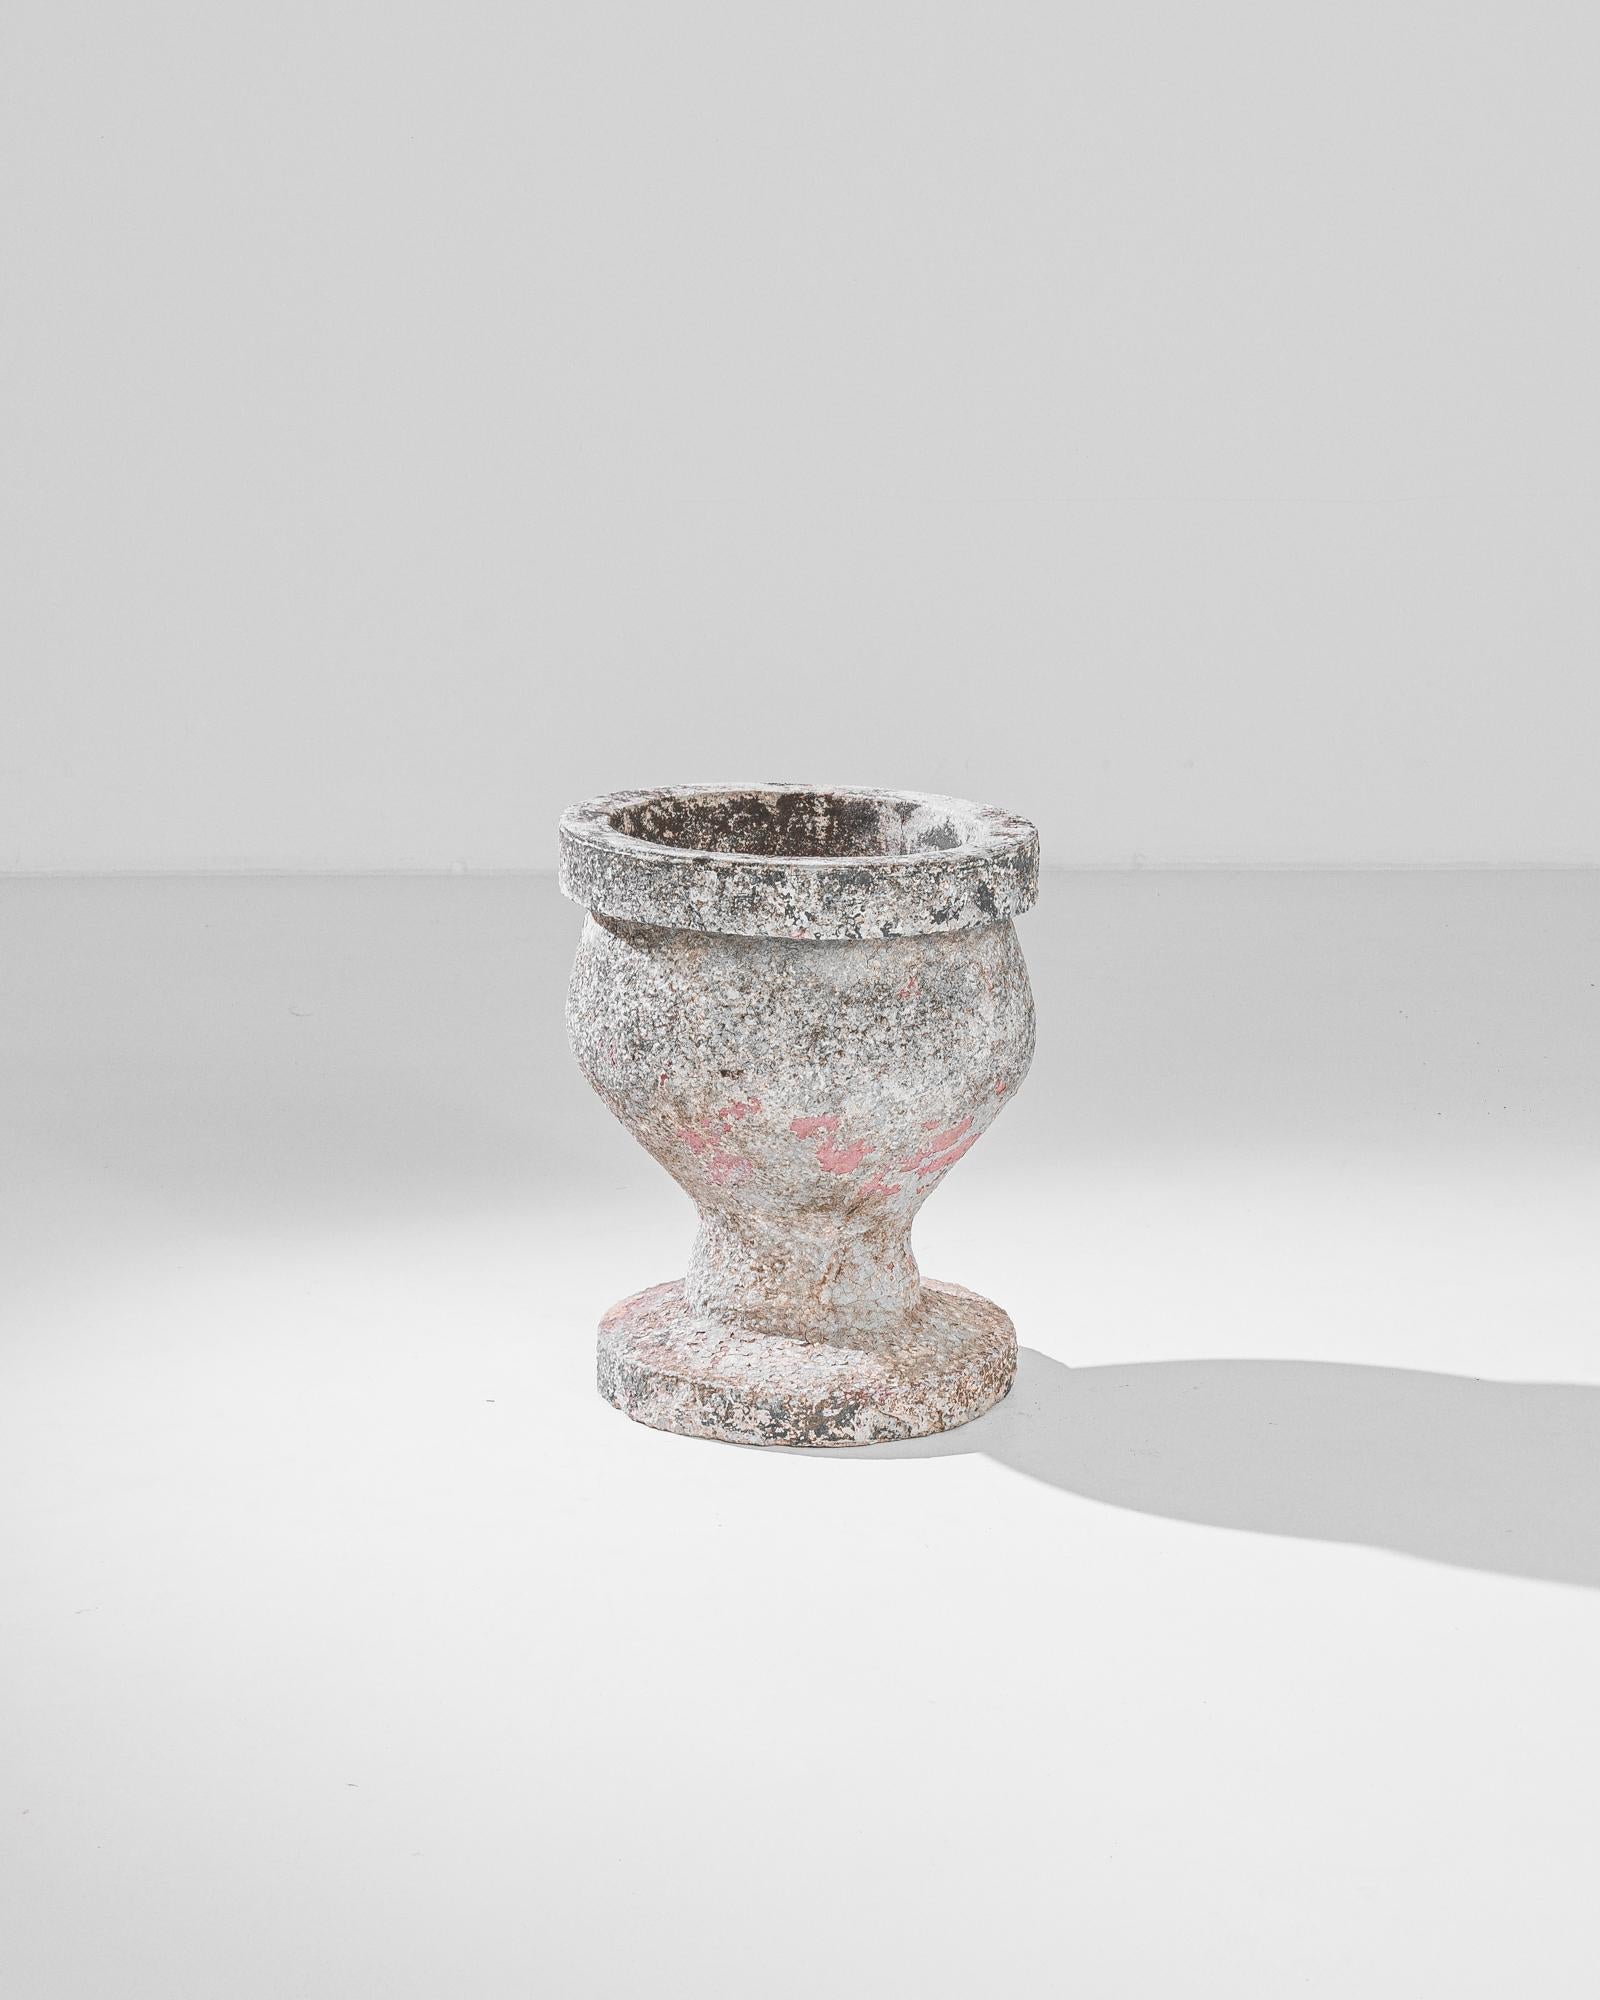 This chalice-shaped concrete planter was made in France, circa 1950. The rich texture of the distinctive patina offers a gradient from a silver grey to a pale cherry red. Its concave body firmly standing on a circular foot imparts stability and a